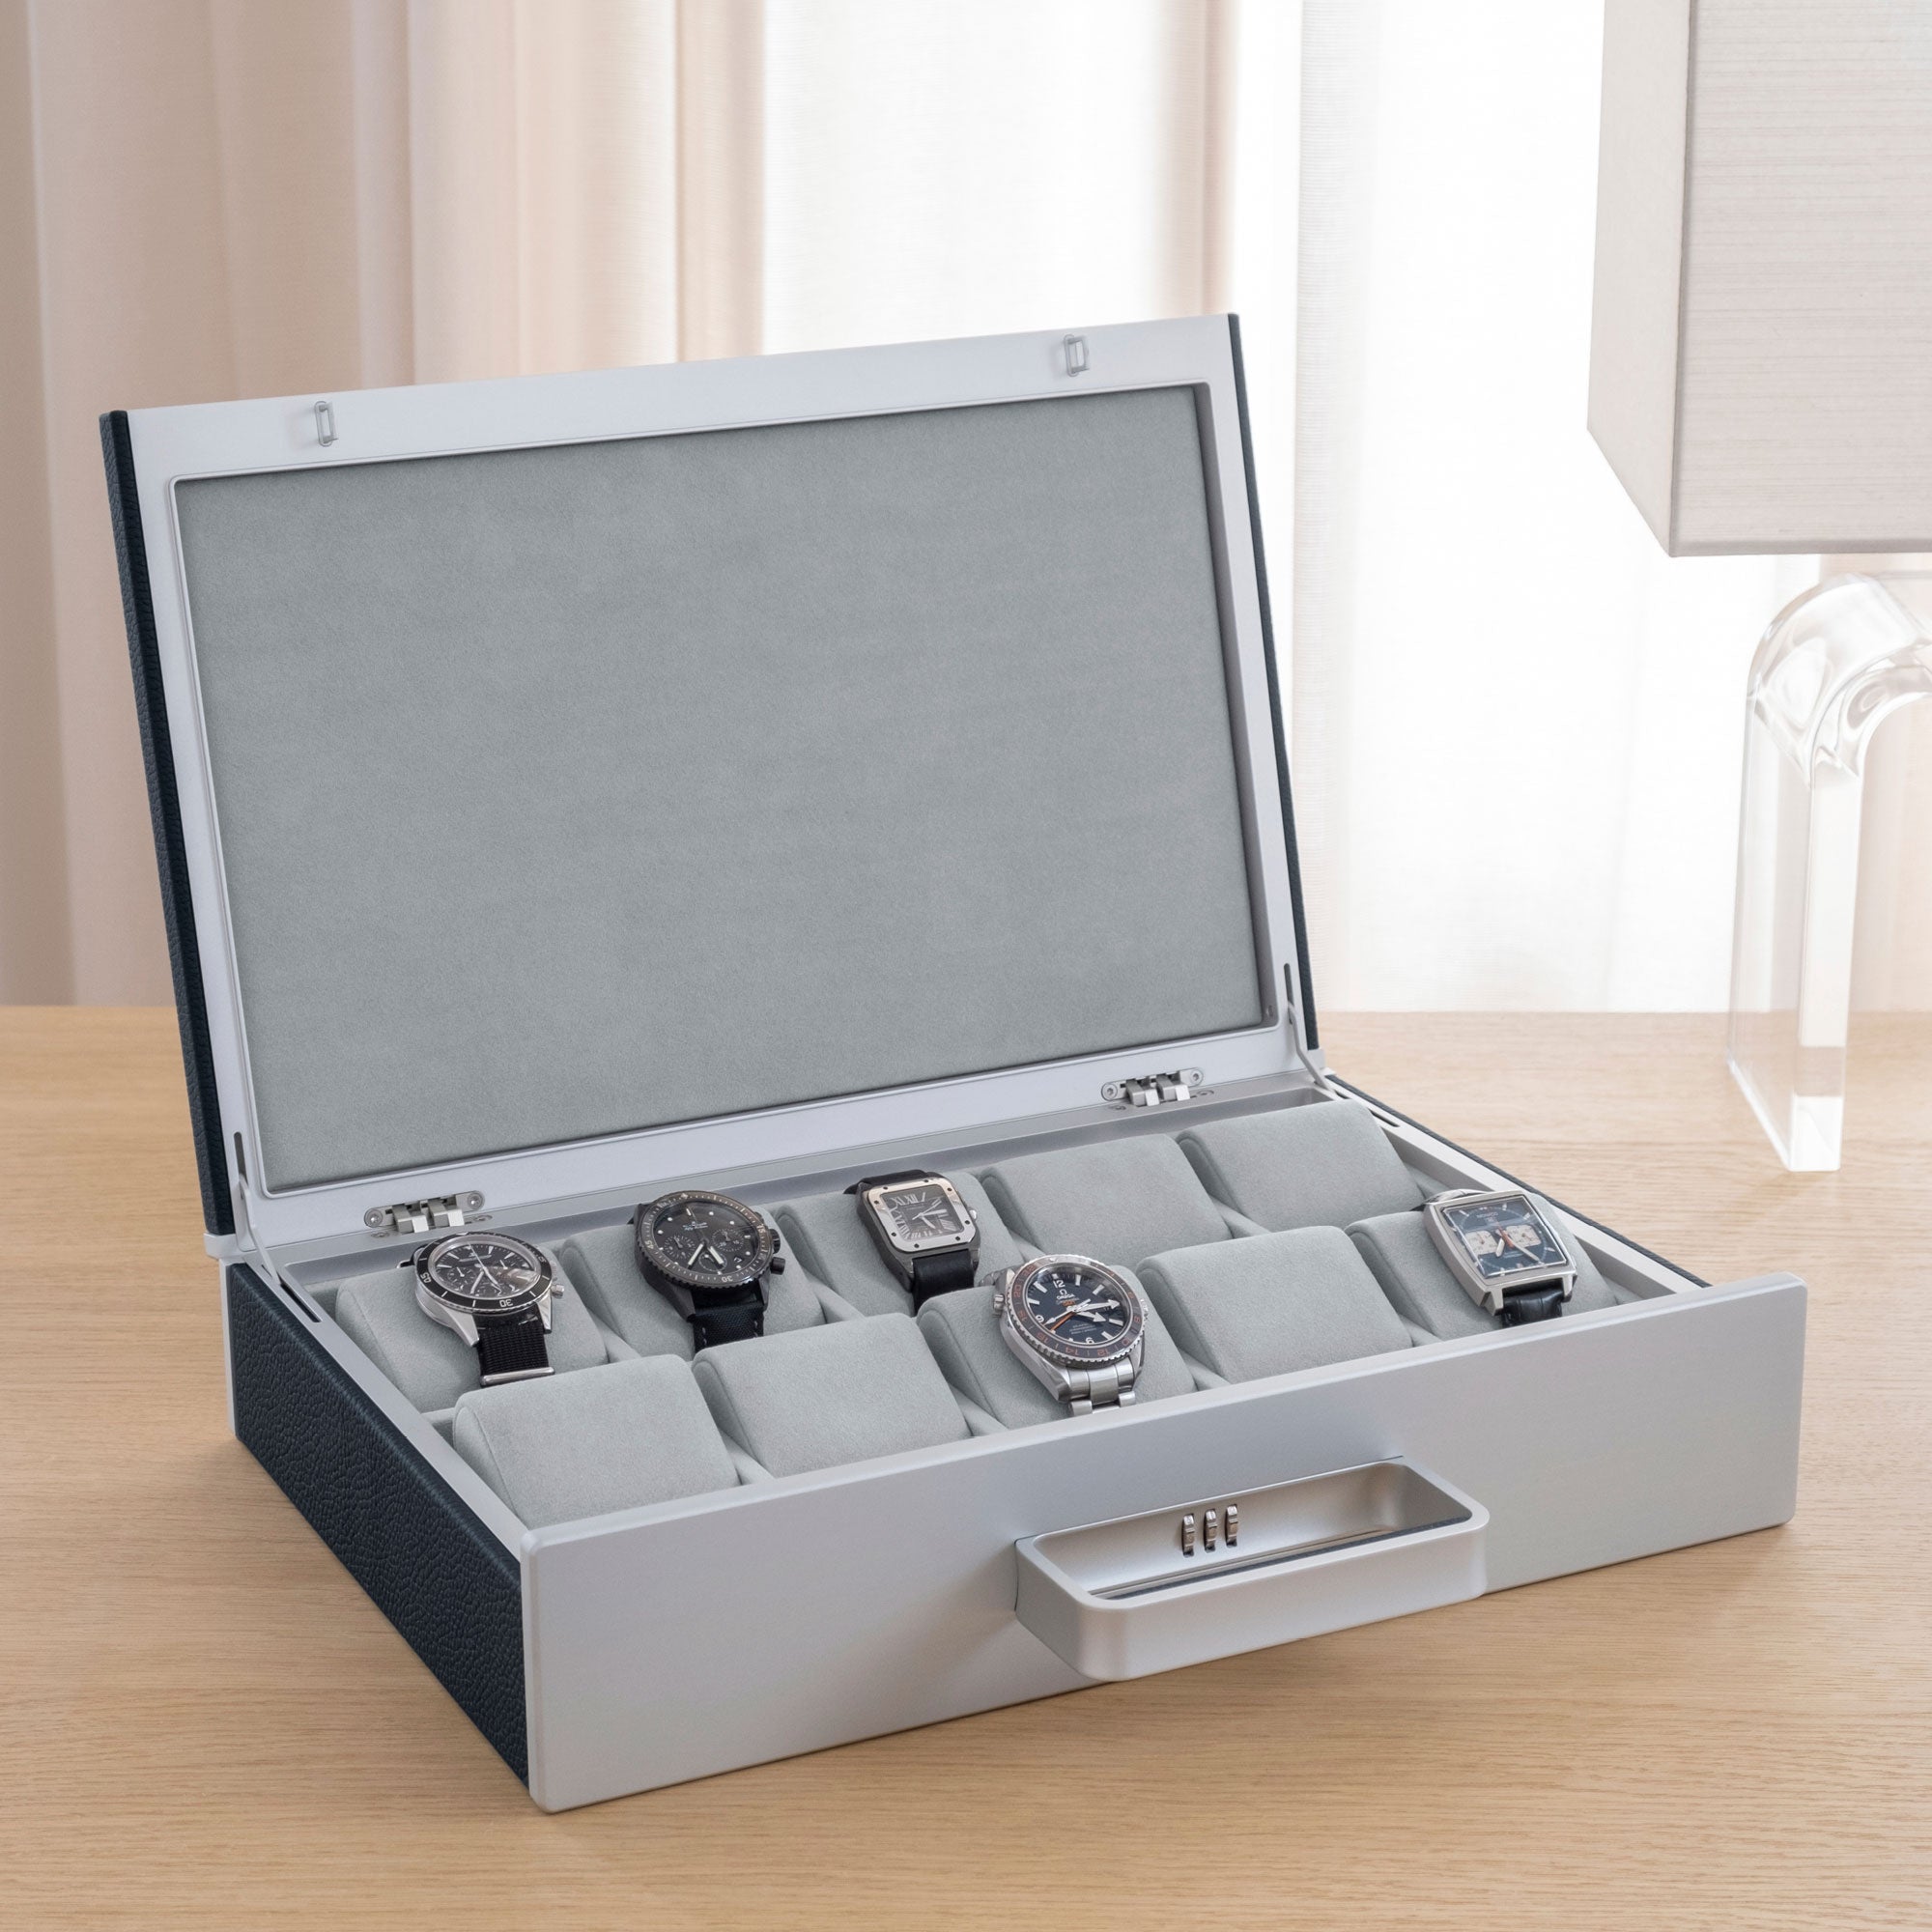 Lifestyle photo of open Mackenzie 10 Watch briefcase showcasing a luxury watch collection of up to 10 watches